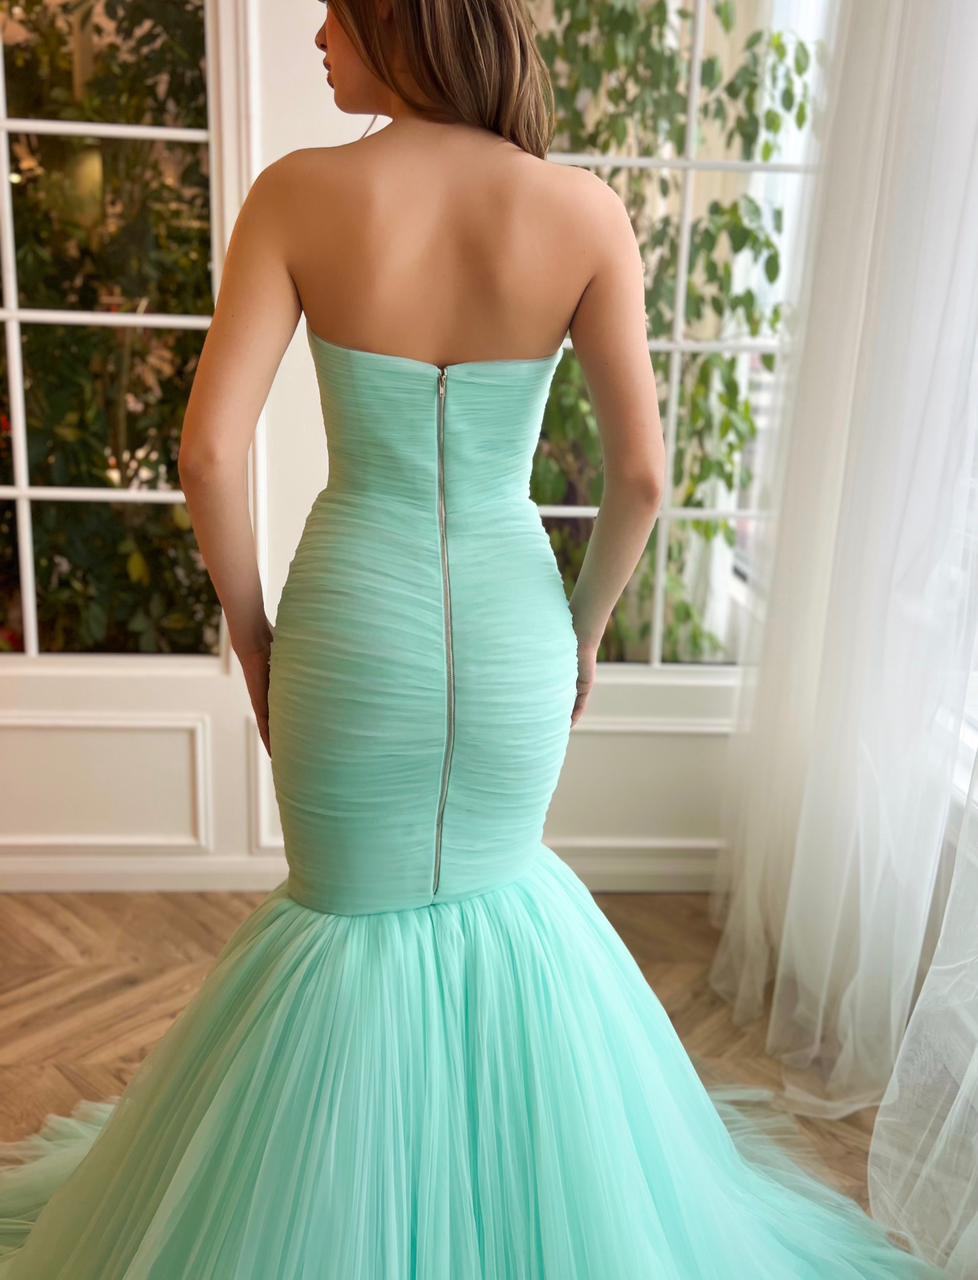 Turquoise mermaid dress with no sleeves and train